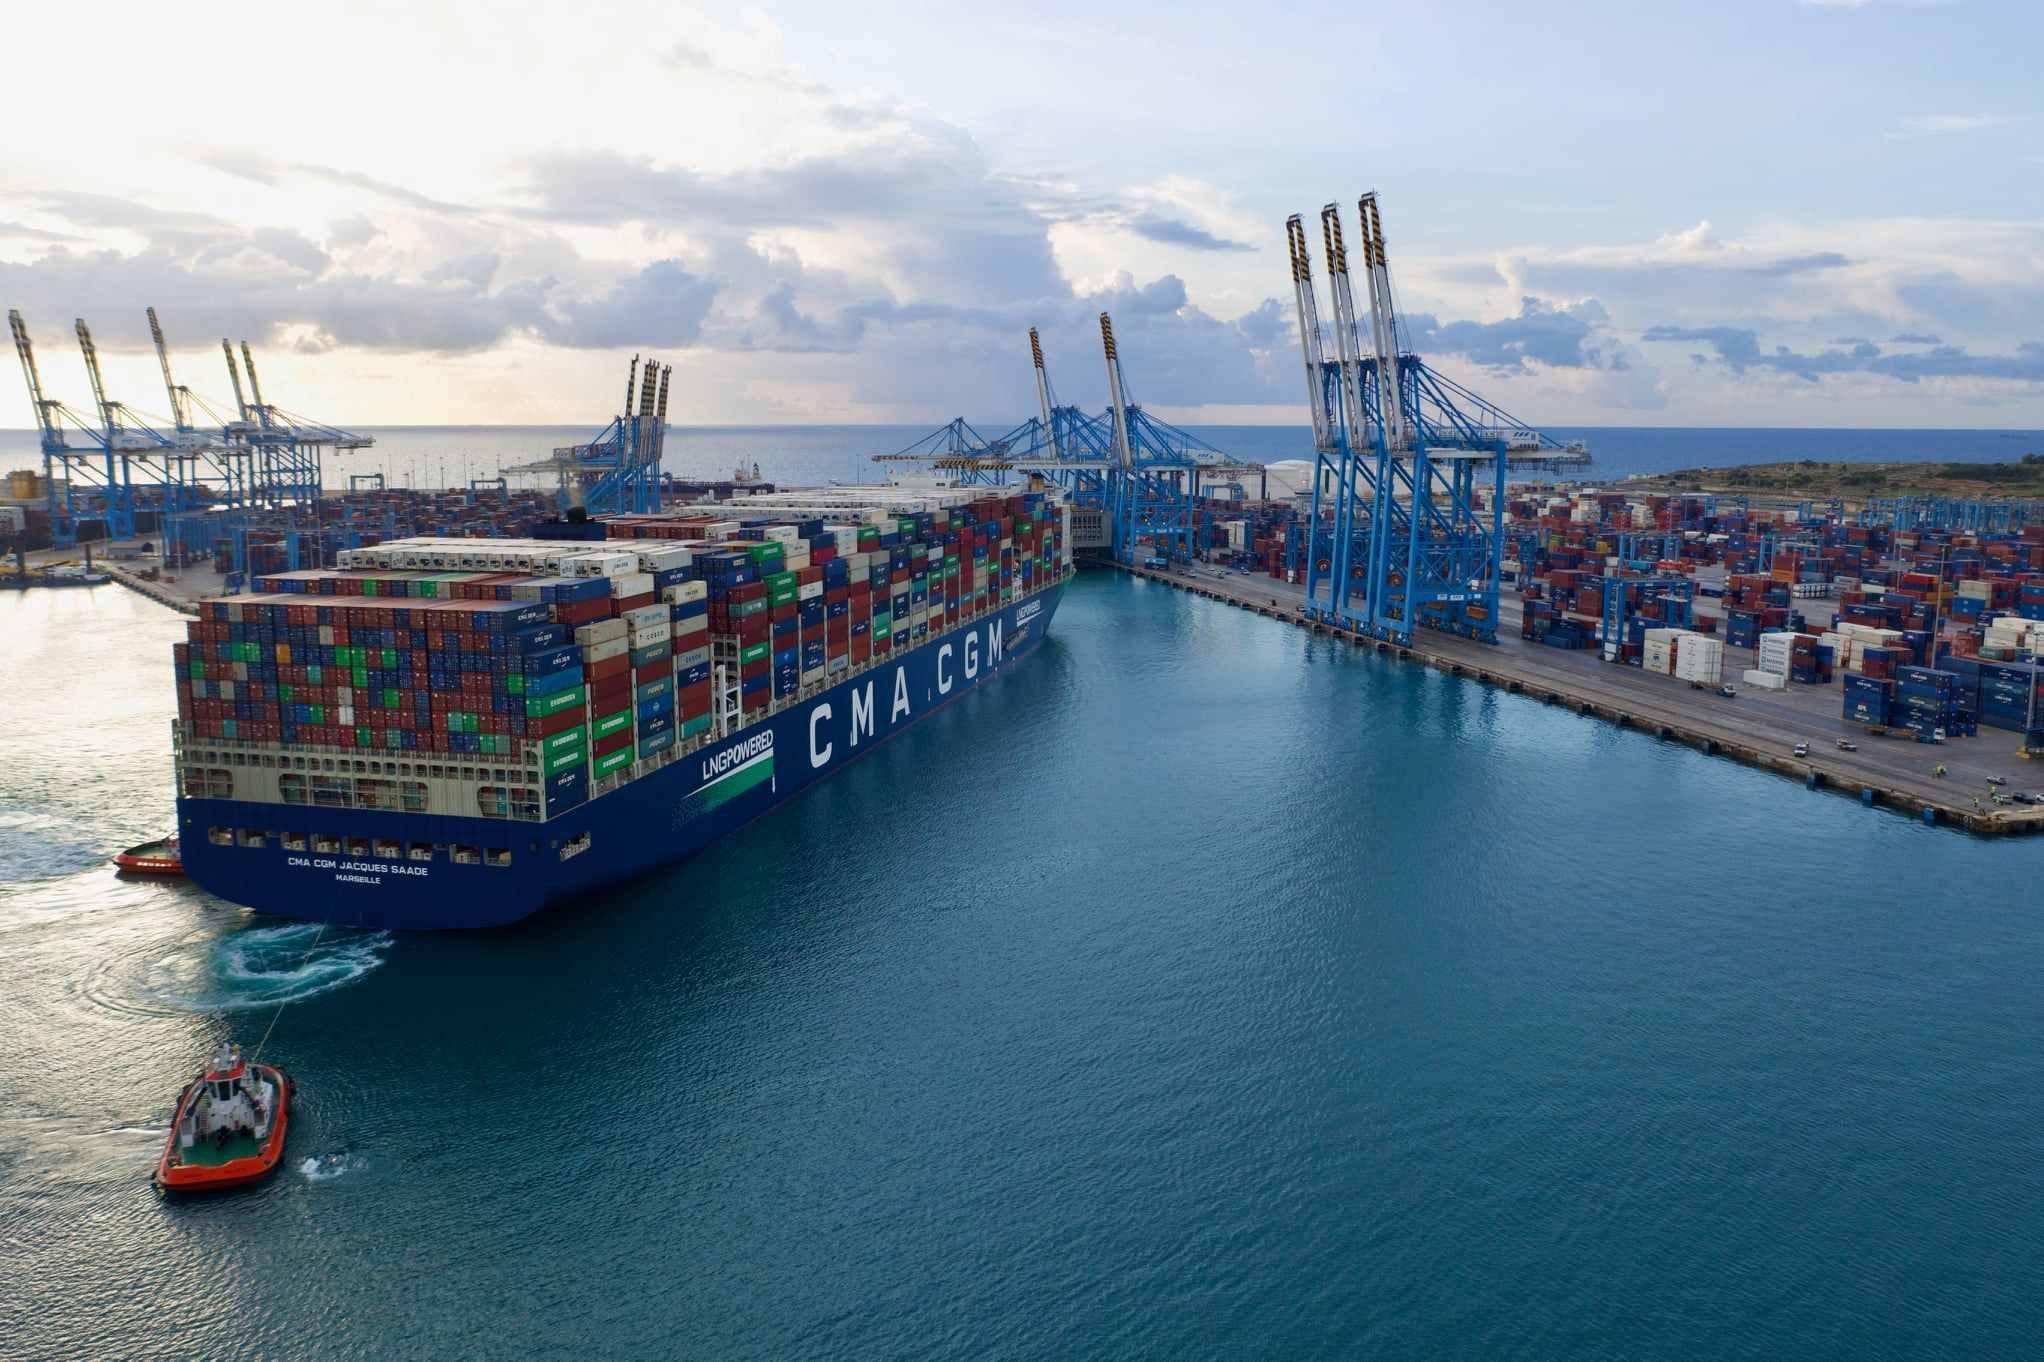 Maiden call in Malta by the CMA CGM JACQUES SAADE, the largest container ship in the world powered by LNG